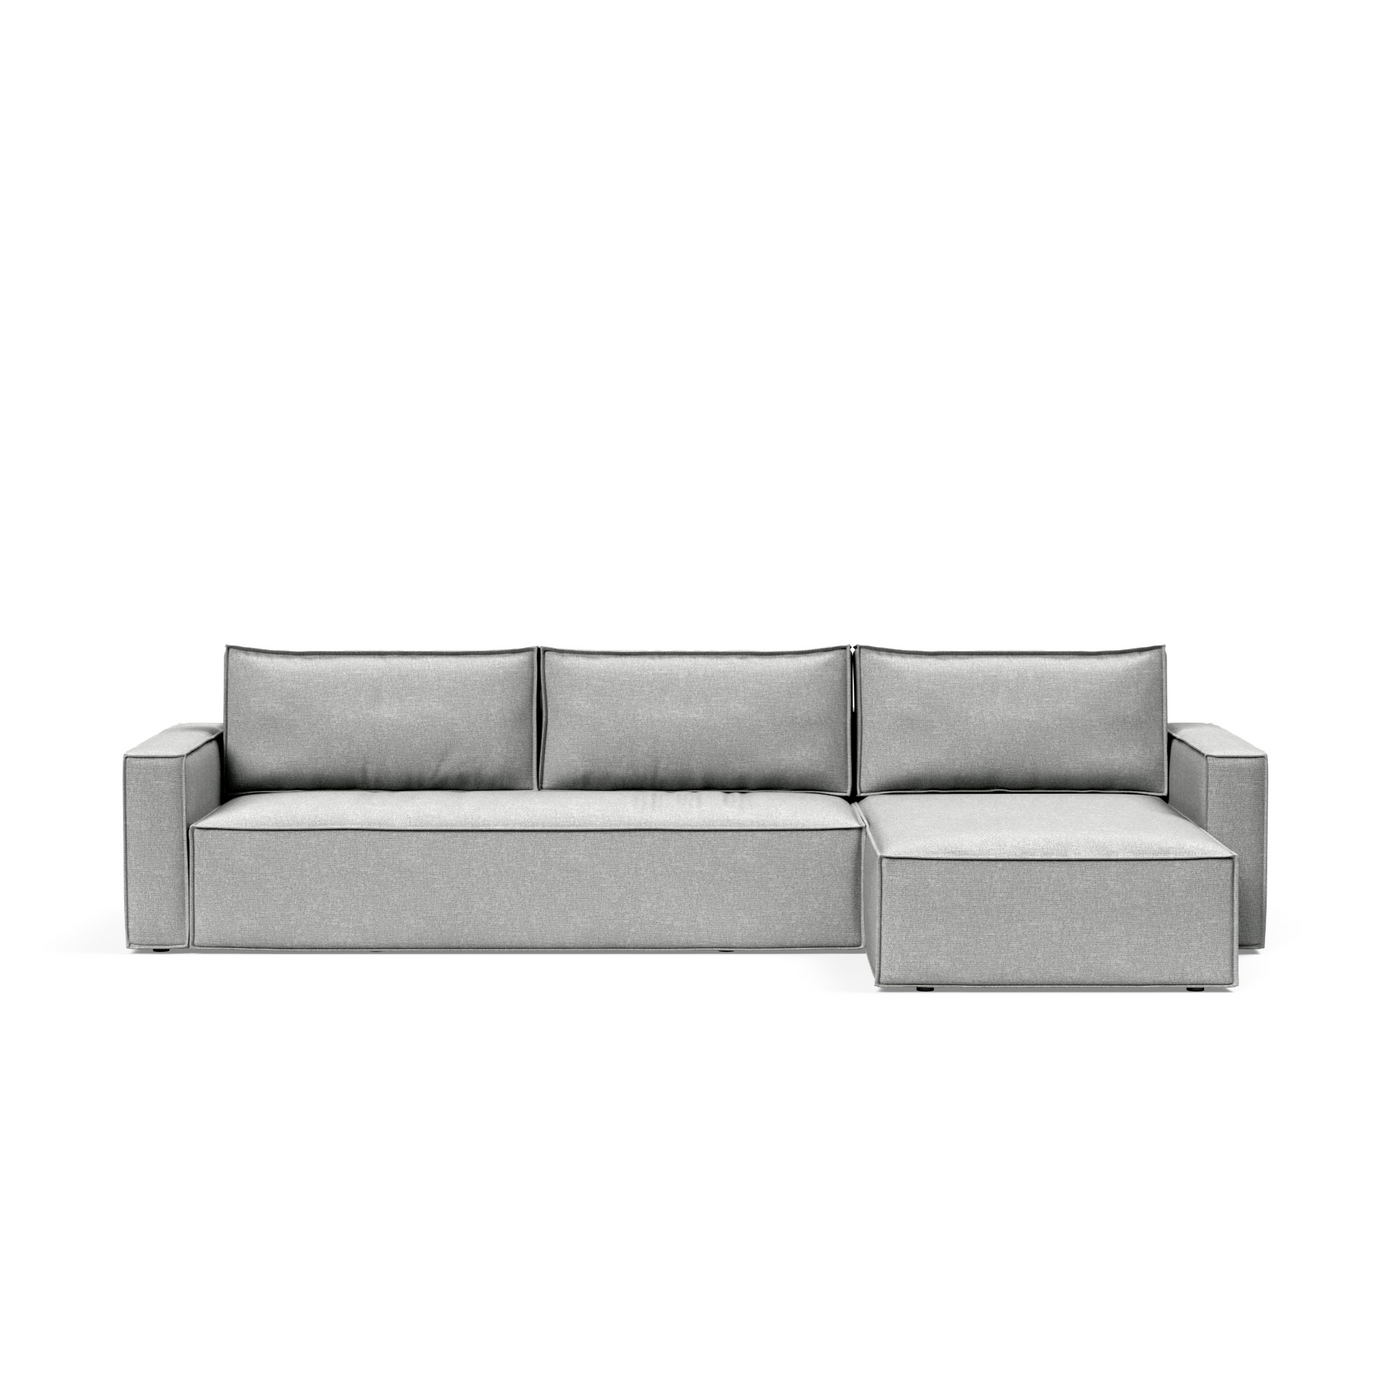 Play Storage Sofa Bed (Queen) with Chaise